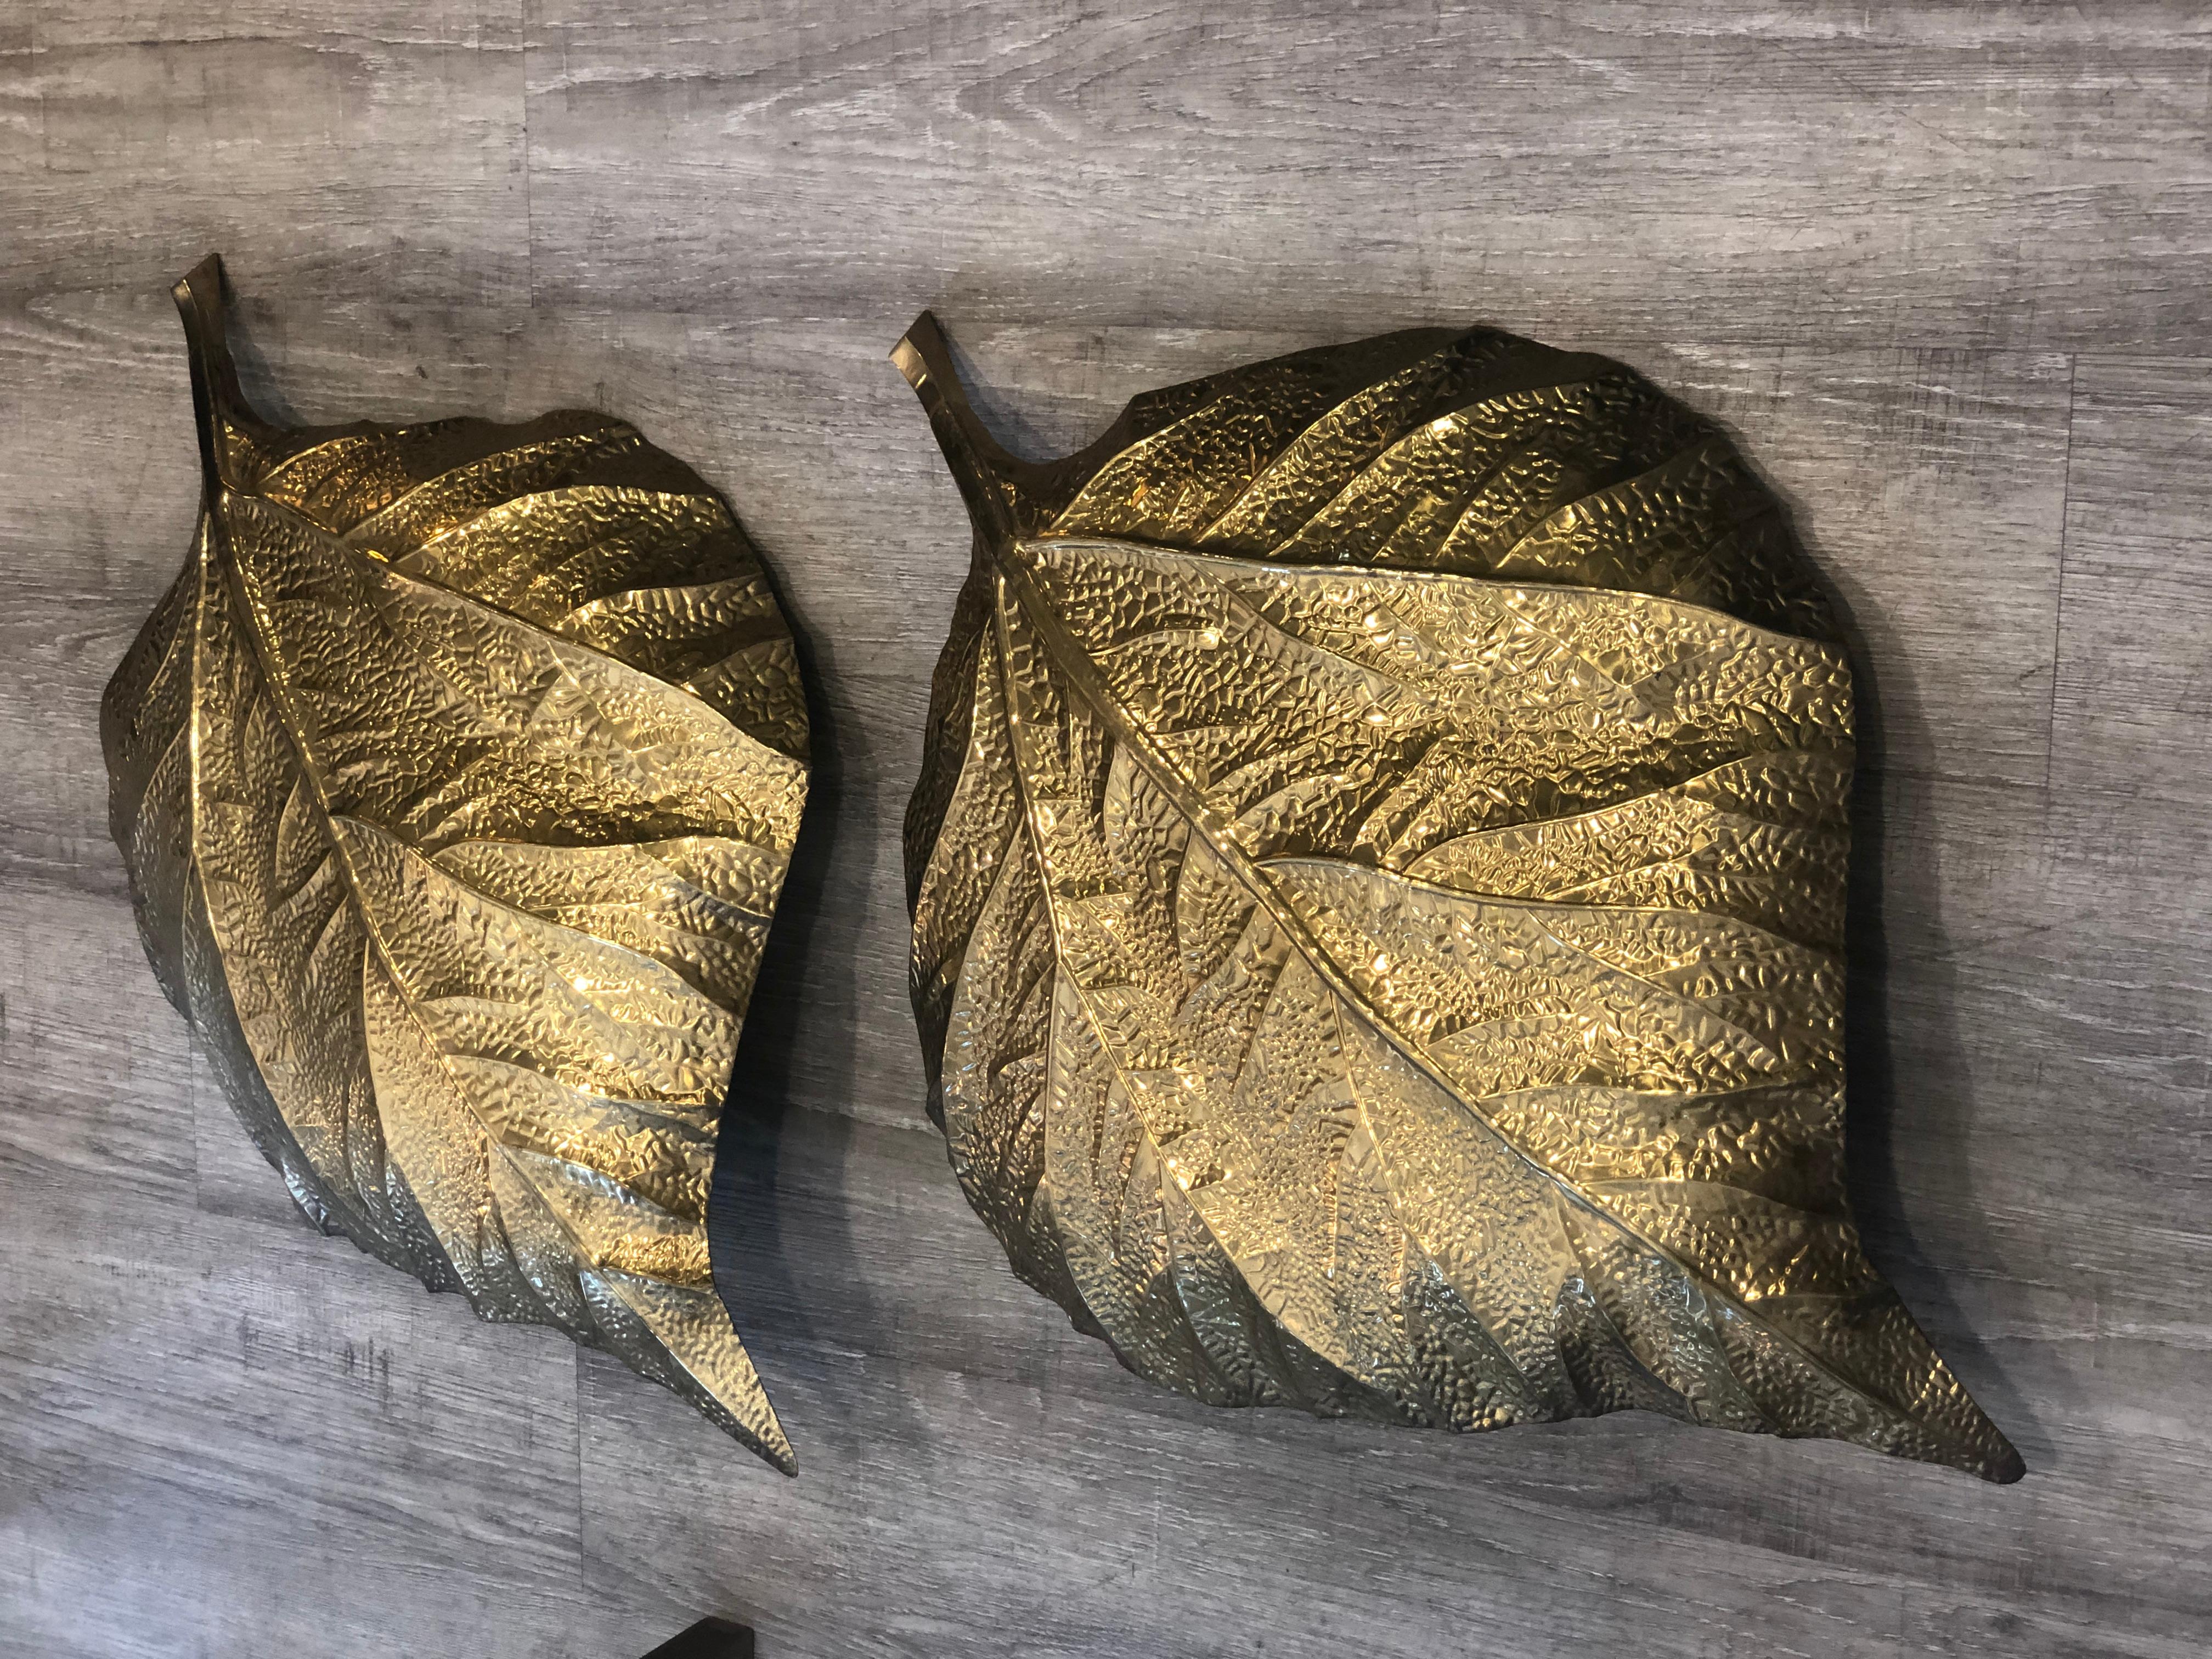 Attributed to the Italian designer Tommaso Barbi in 1960s, these lights representing rhubarb leaves are made in brass. They have been rewired, ready to be hanged. They have one light bulb each. Size: h 75 cm, w 54 cm. Overall condition are good,